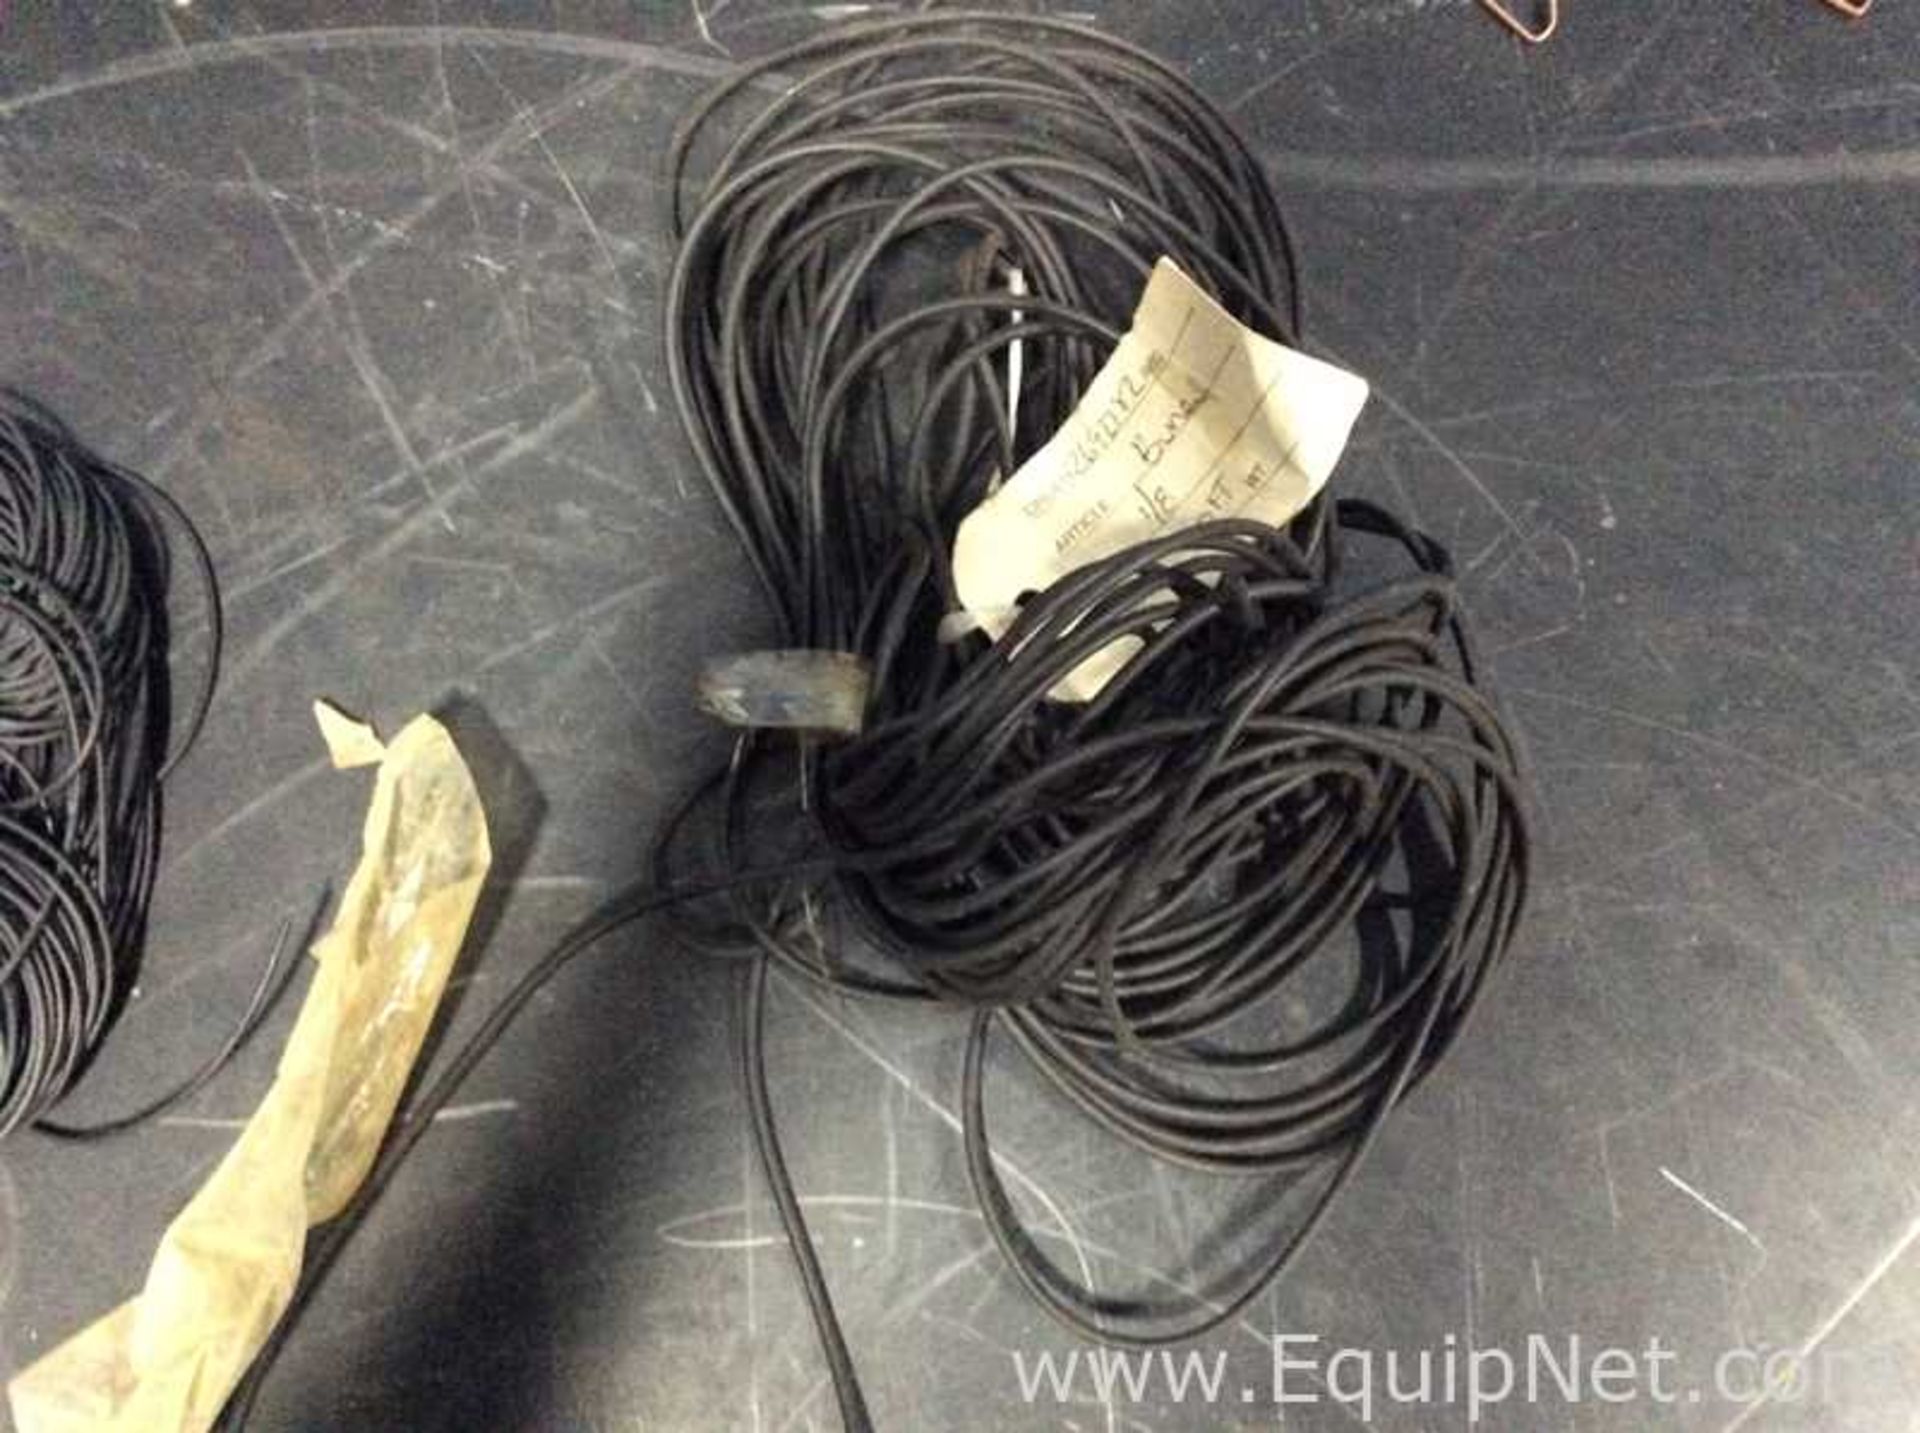 Lot of Various Sized Solid Rubber Lines and Tiles - Image 5 of 7